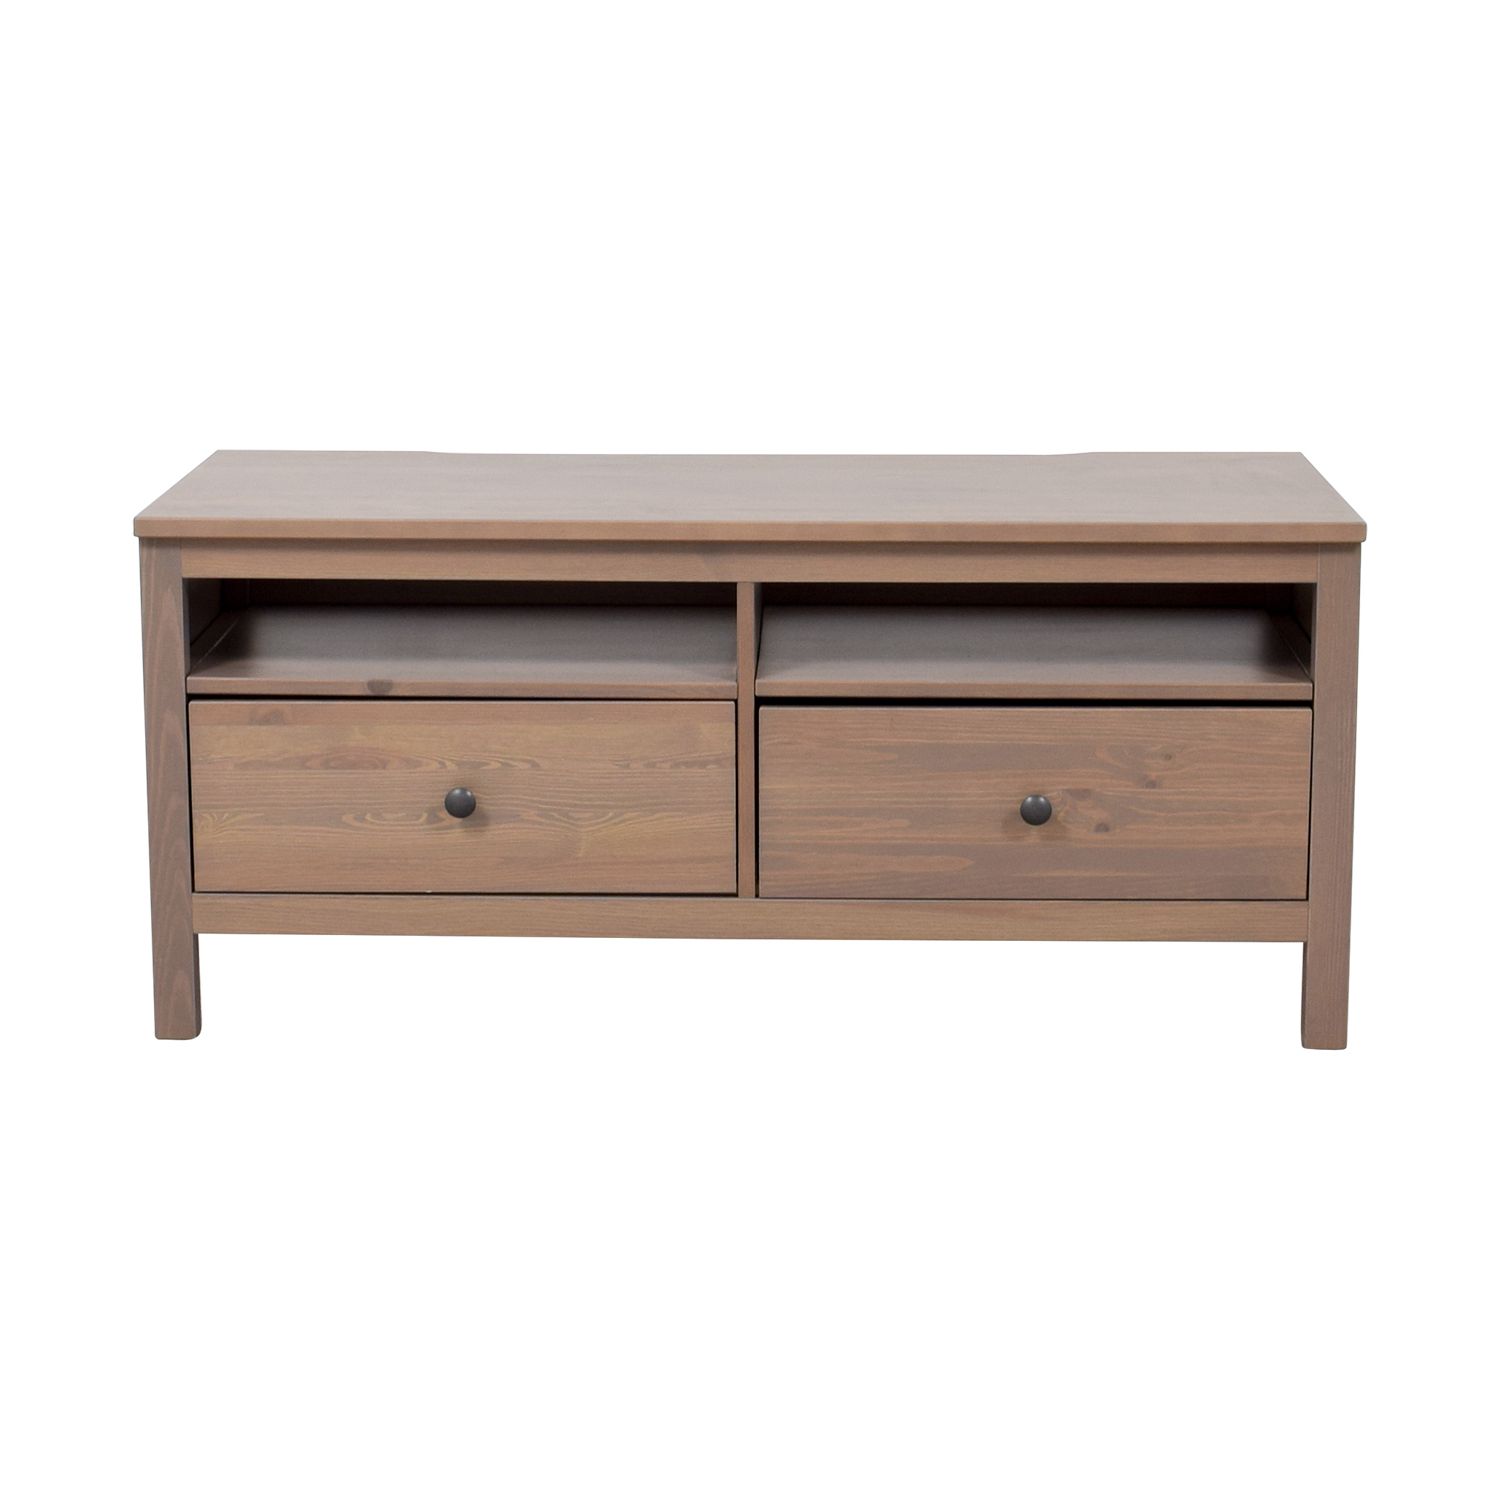 [%90% Off – Ikea Ikea Two Drawer Tv Stand / Storage Throughout Fashionable Tv Drawer Units|tv Drawer Units Regarding Preferred 90% Off – Ikea Ikea Two Drawer Tv Stand / Storage|2018 Tv Drawer Units Regarding 90% Off – Ikea Ikea Two Drawer Tv Stand / Storage|2017 90% Off – Ikea Ikea Two Drawer Tv Stand / Storage For Tv Drawer Units%] (Photo 14 of 20)